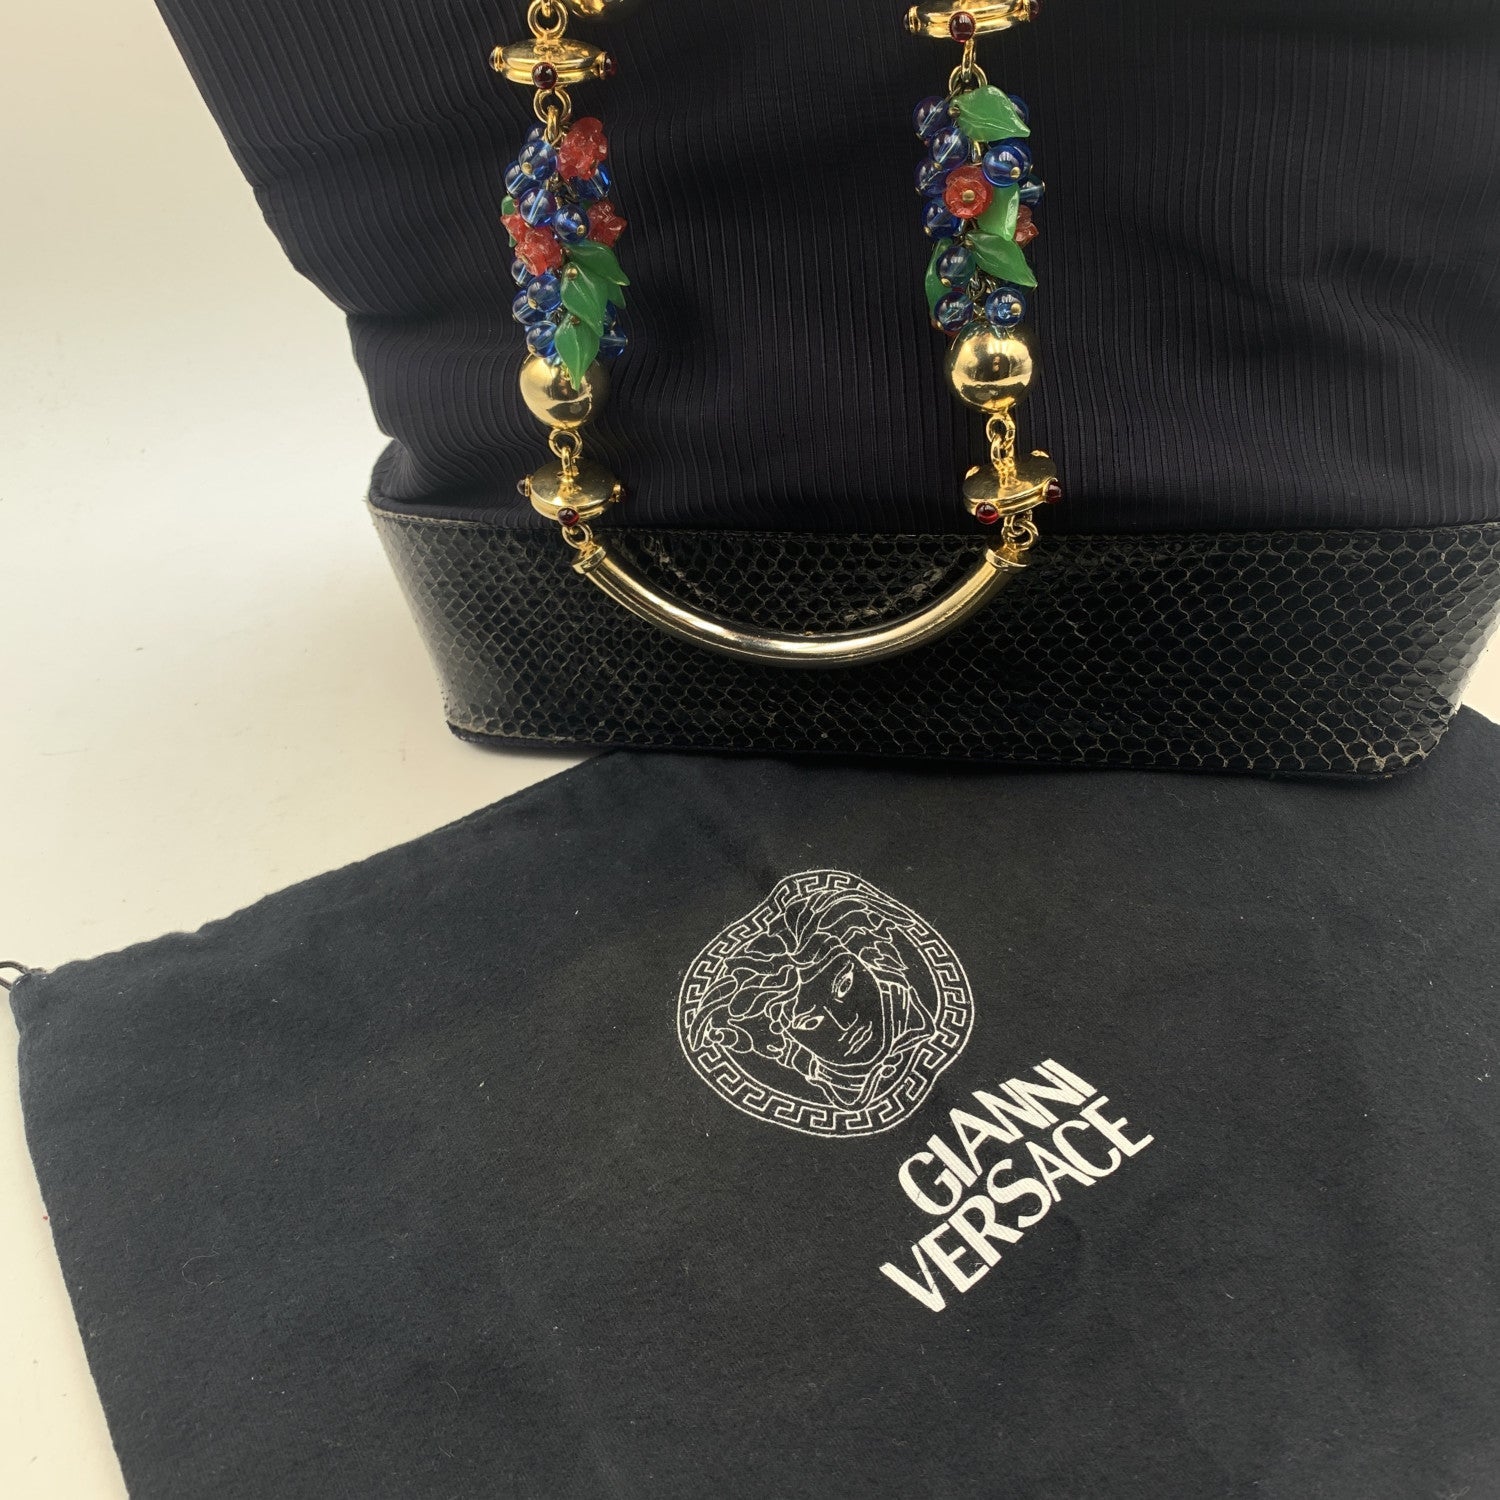 GIANNI VERSACE Totes